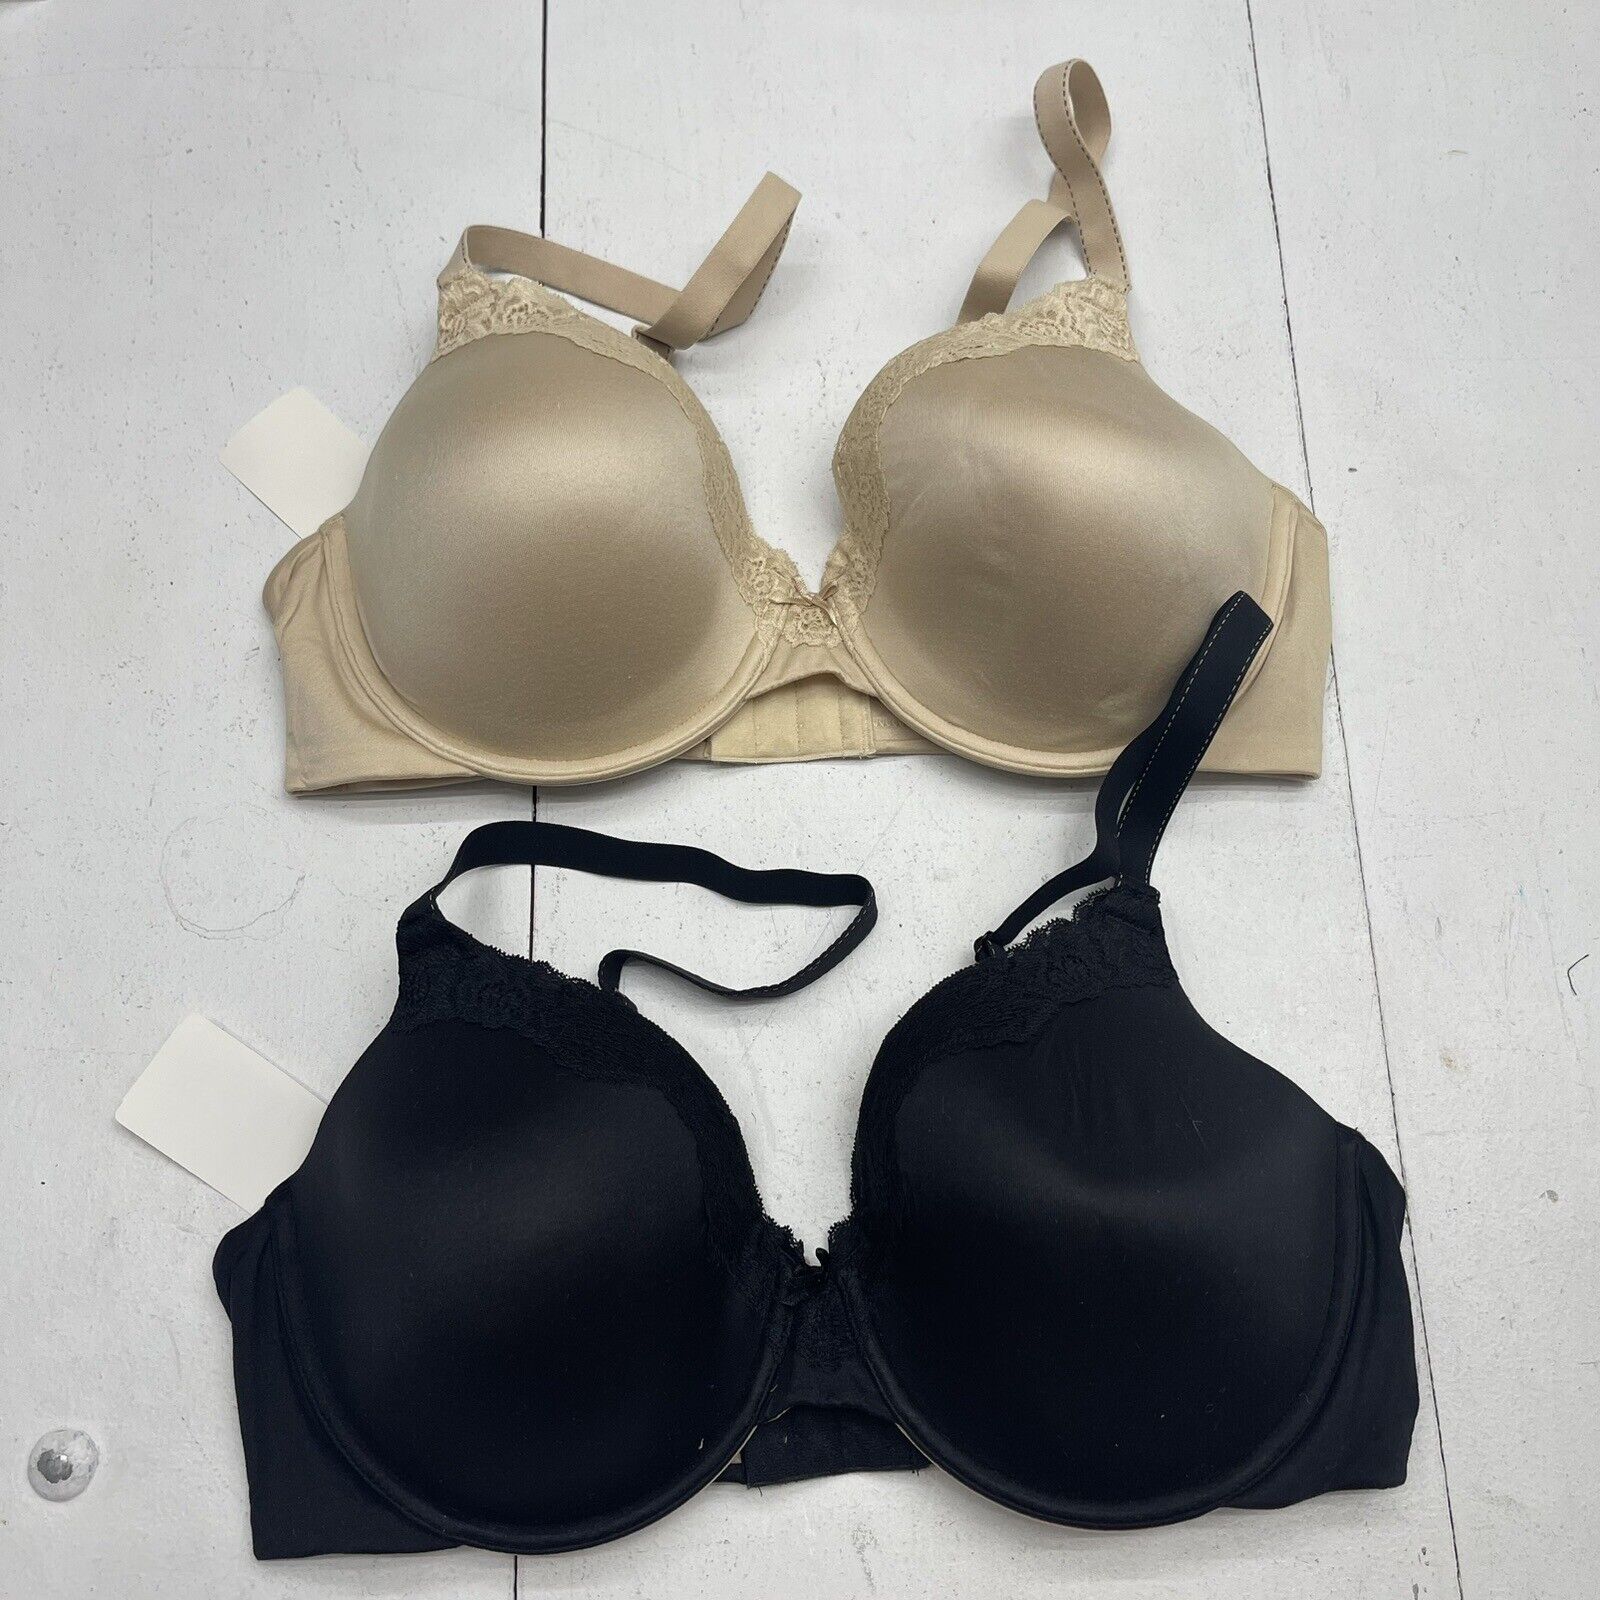 Bras in the size 38D for Women on sale